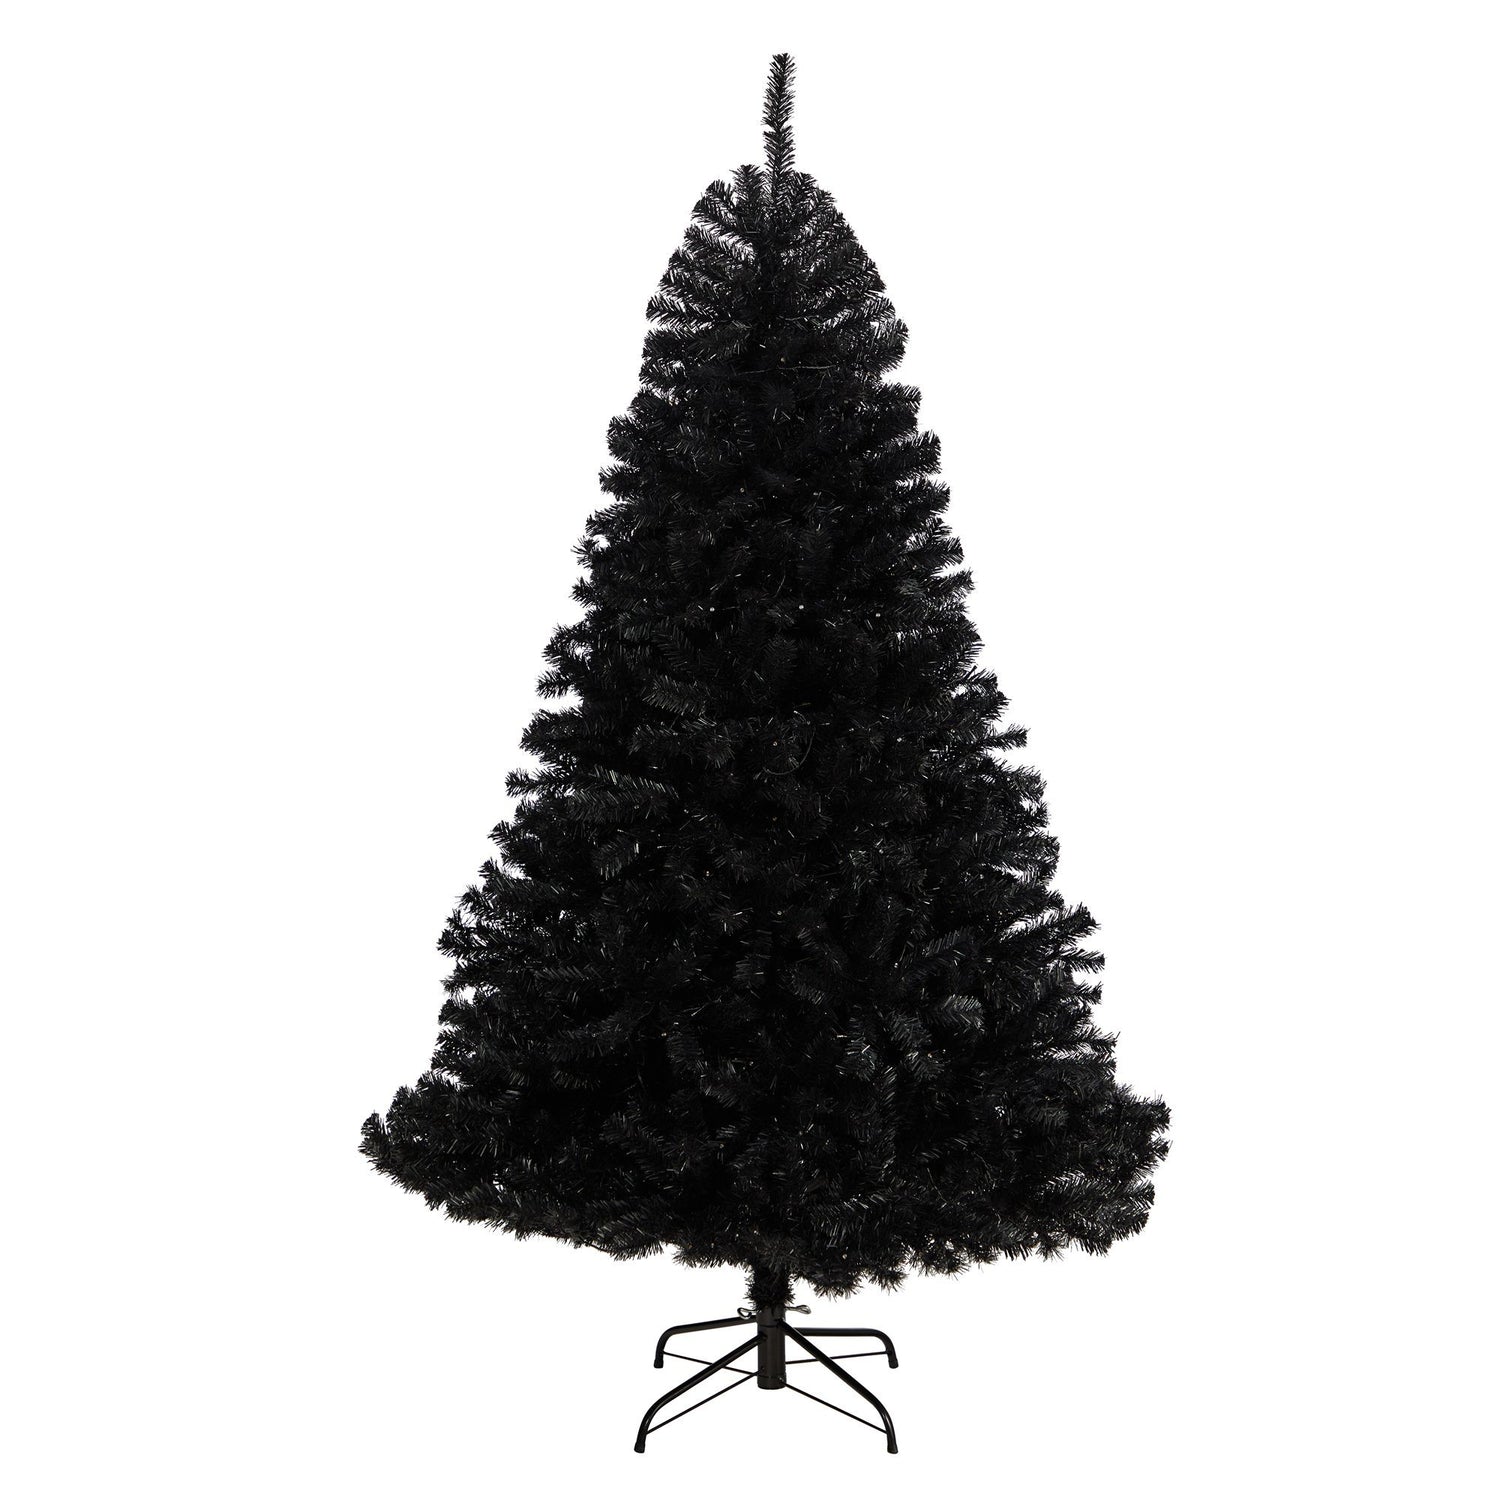 6’ Black Artificial Christmas Tree with 400 Clear LED Lights and 1036 Tips